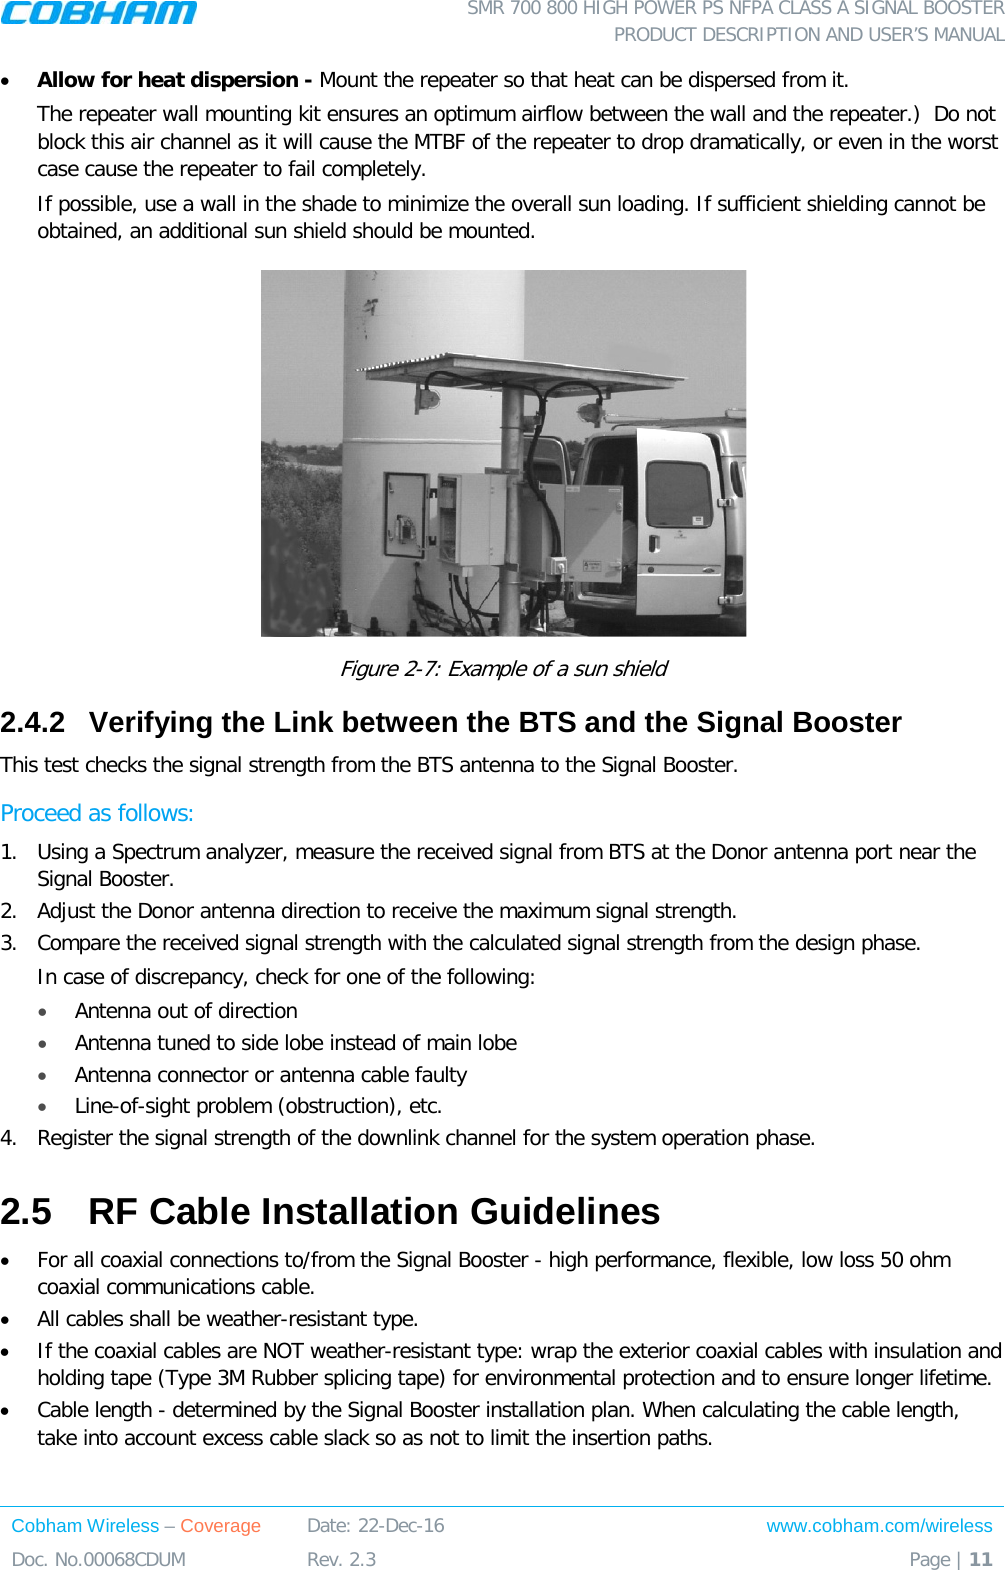  SMR 700 800 HIGH POWER PS NFPA CLASS A SIGNAL BOOSTER  PRODUCT DESCRIPTION AND USER’S MANUAL Cobham Wireless – Coverage Date: 22-Dec-16 www.cobham.com/wireless Doc. No.00068CDUM  Rev. 2.3  Page | 11  • Allow for heat dispersion - Mount the repeater so that heat can be dispersed from it.   The repeater wall mounting kit ensures an optimum airflow between the wall and the repeater.)  Do not block this air channel as it will cause the MTBF of the repeater to drop dramatically, or even in the worst case cause the repeater to fail completely.  If possible, use a wall in the shade to minimize the overall sun loading. If sufficient shielding cannot be obtained, an additional sun shield should be mounted.   Figure  2-7: Example of a sun shield 2.4.2  Verifying the Link between the BTS and the Signal Booster This test checks the signal strength from the BTS antenna to the Signal Booster.  Proceed as follows:  1.  Using a Spectrum analyzer, measure the received signal from BTS at the Donor antenna port near the Signal Booster.  2.  Adjust the Donor antenna direction to receive the maximum signal strength. 3.  Compare the received signal strength with the calculated signal strength from the design phase. In case of discrepancy, check for one of the following:  • Antenna out of direction  • Antenna tuned to side lobe instead of main lobe  • Antenna connector or antenna cable faulty  • Line-of-sight problem (obstruction), etc. 4.  Register the signal strength of the downlink channel for the system operation phase. 2.5  RF Cable Installation Guidelines • For all coaxial connections to/from the Signal Booster - high performance, flexible, low loss 50 ohm coaxial communications cable.  • All cables shall be weather-resistant type.  • If the coaxial cables are NOT weather-resistant type: wrap the exterior coaxial cables with insulation and holding tape (Type 3M Rubber splicing tape) for environmental protection and to ensure longer lifetime. • Cable length - determined by the Signal Booster installation plan. When calculating the cable length, take into account excess cable slack so as not to limit the insertion paths.  